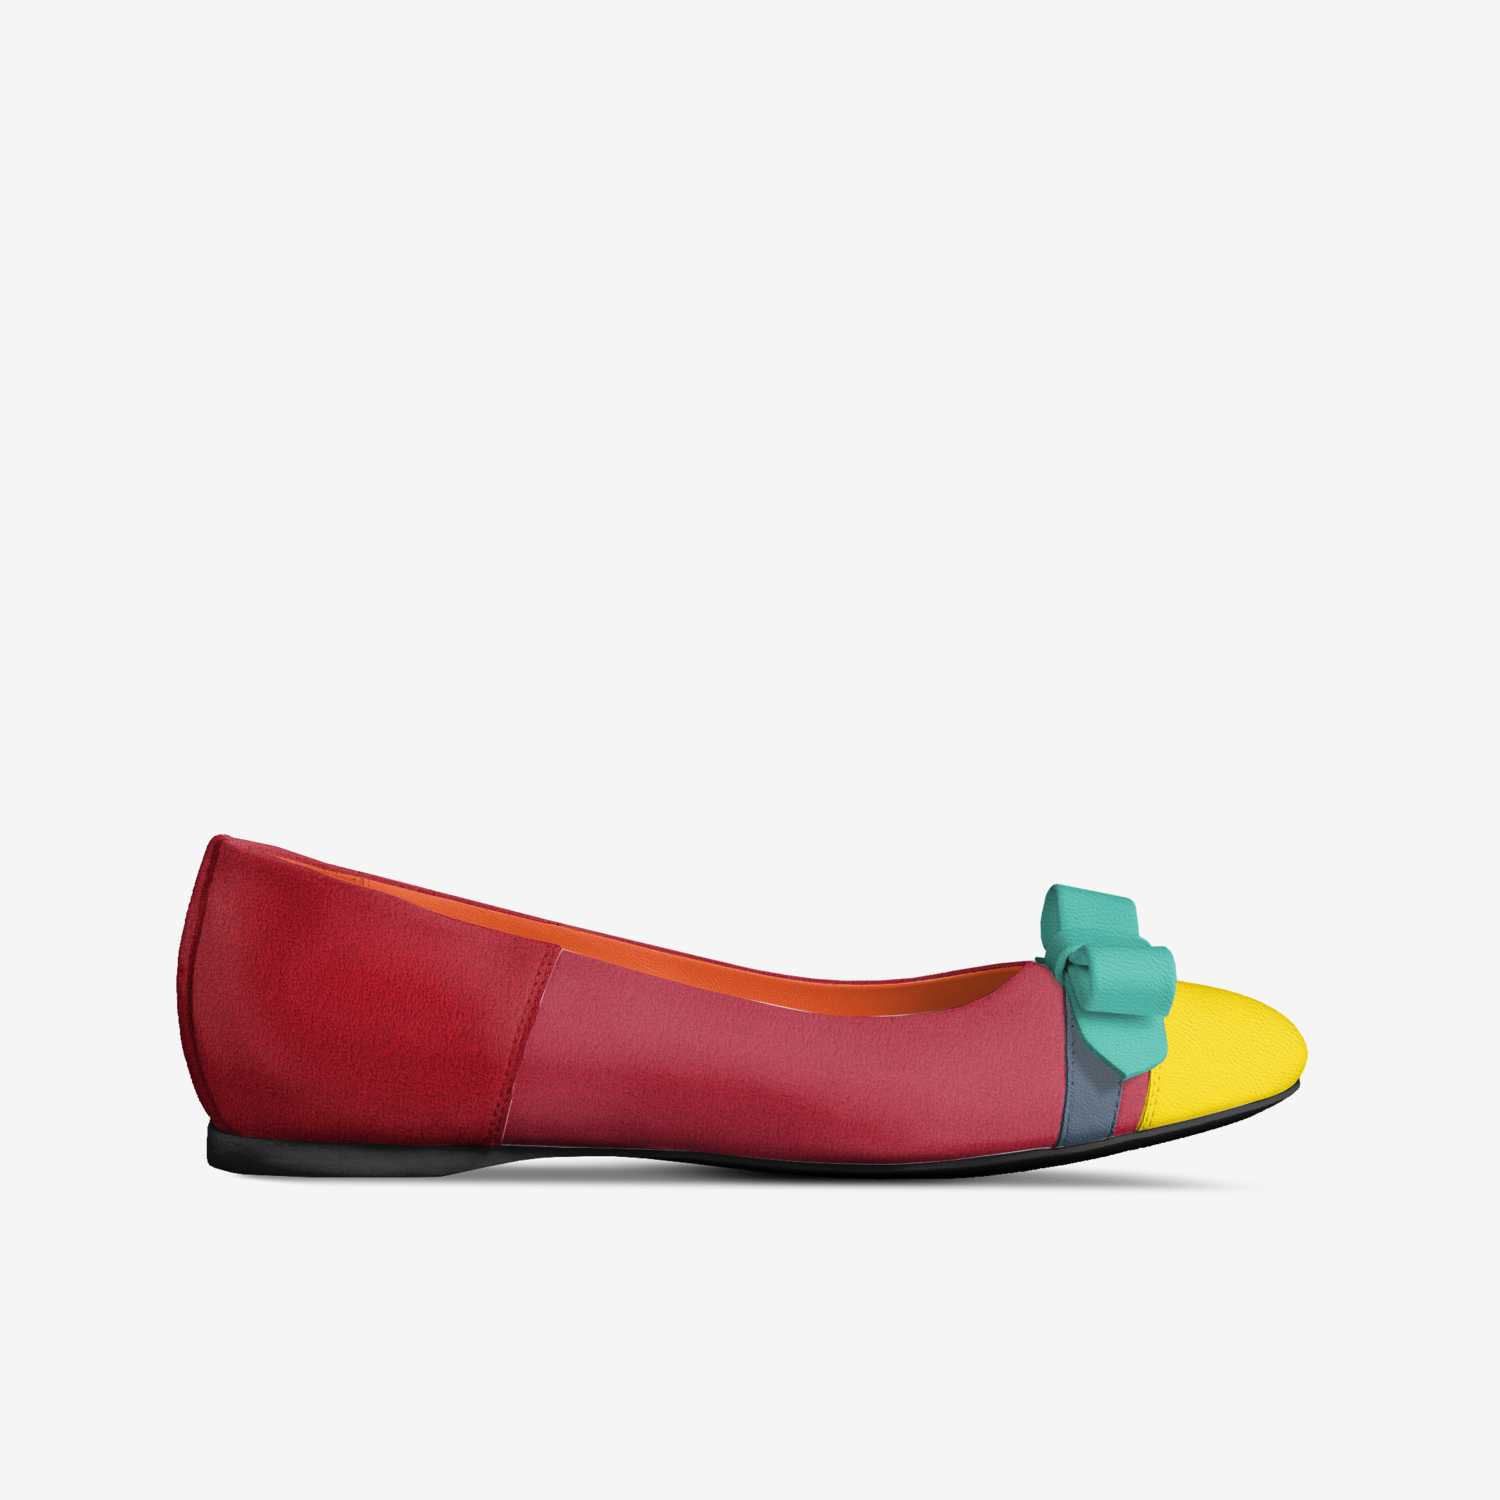 JH Agro custom made in Italy shoes by Karina Lichtenberg | Side view